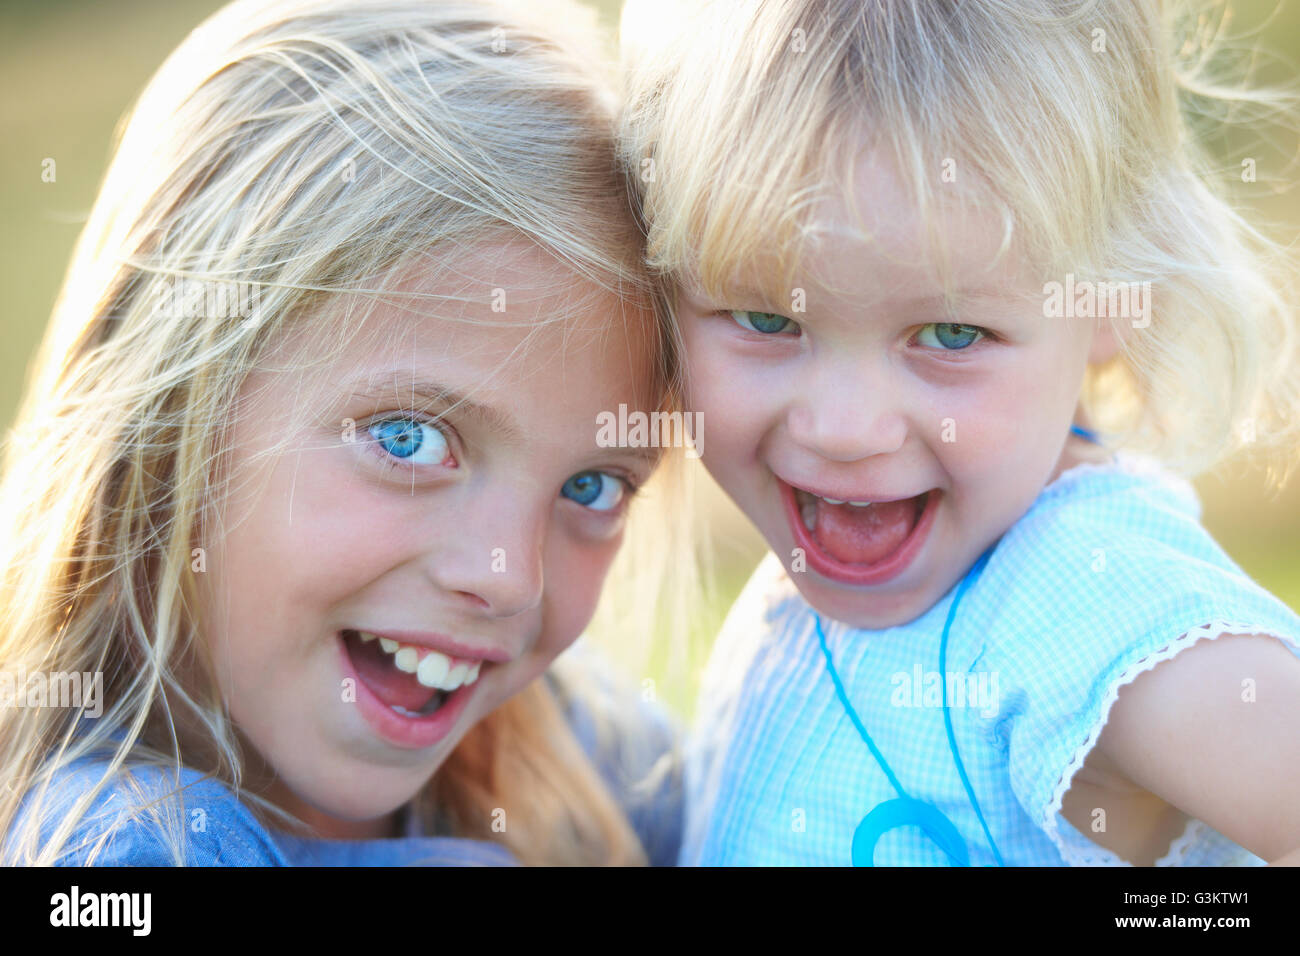 Portrait of two young sisters, outdoors, smiling Stock Photo